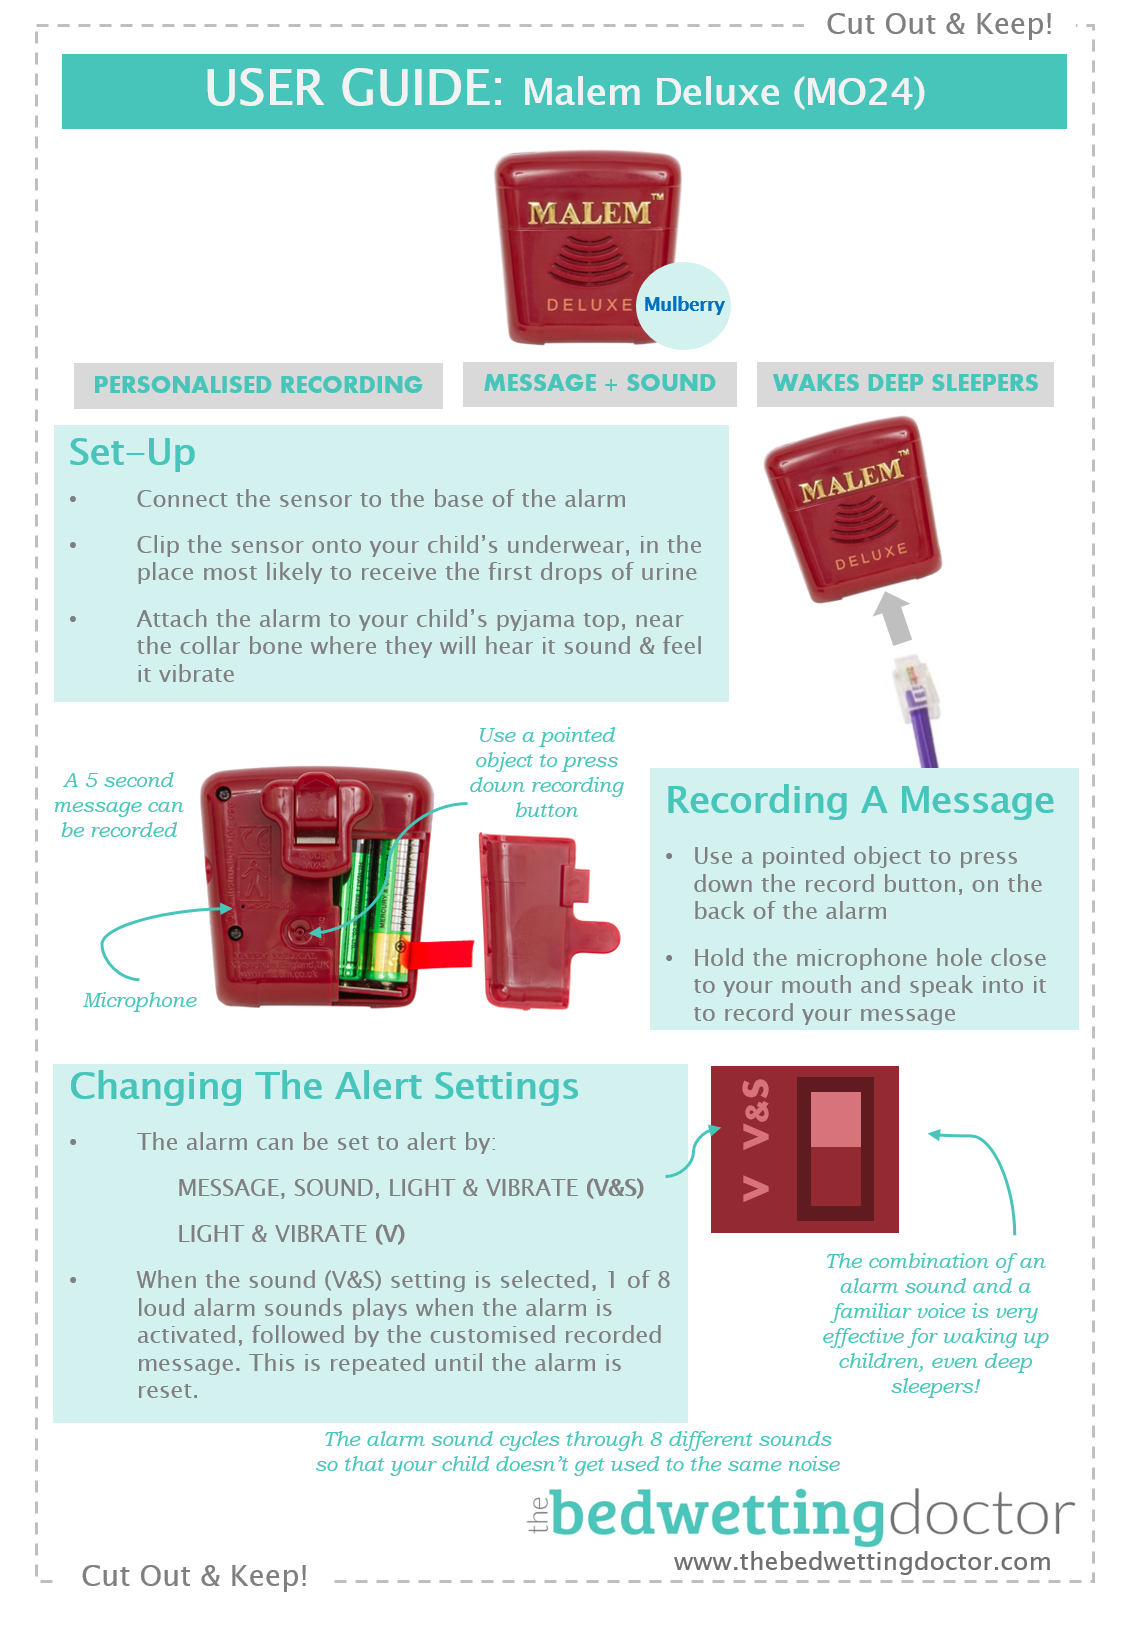 User Guide: Malem Deluxe (MO24) Bedwetting Alarm